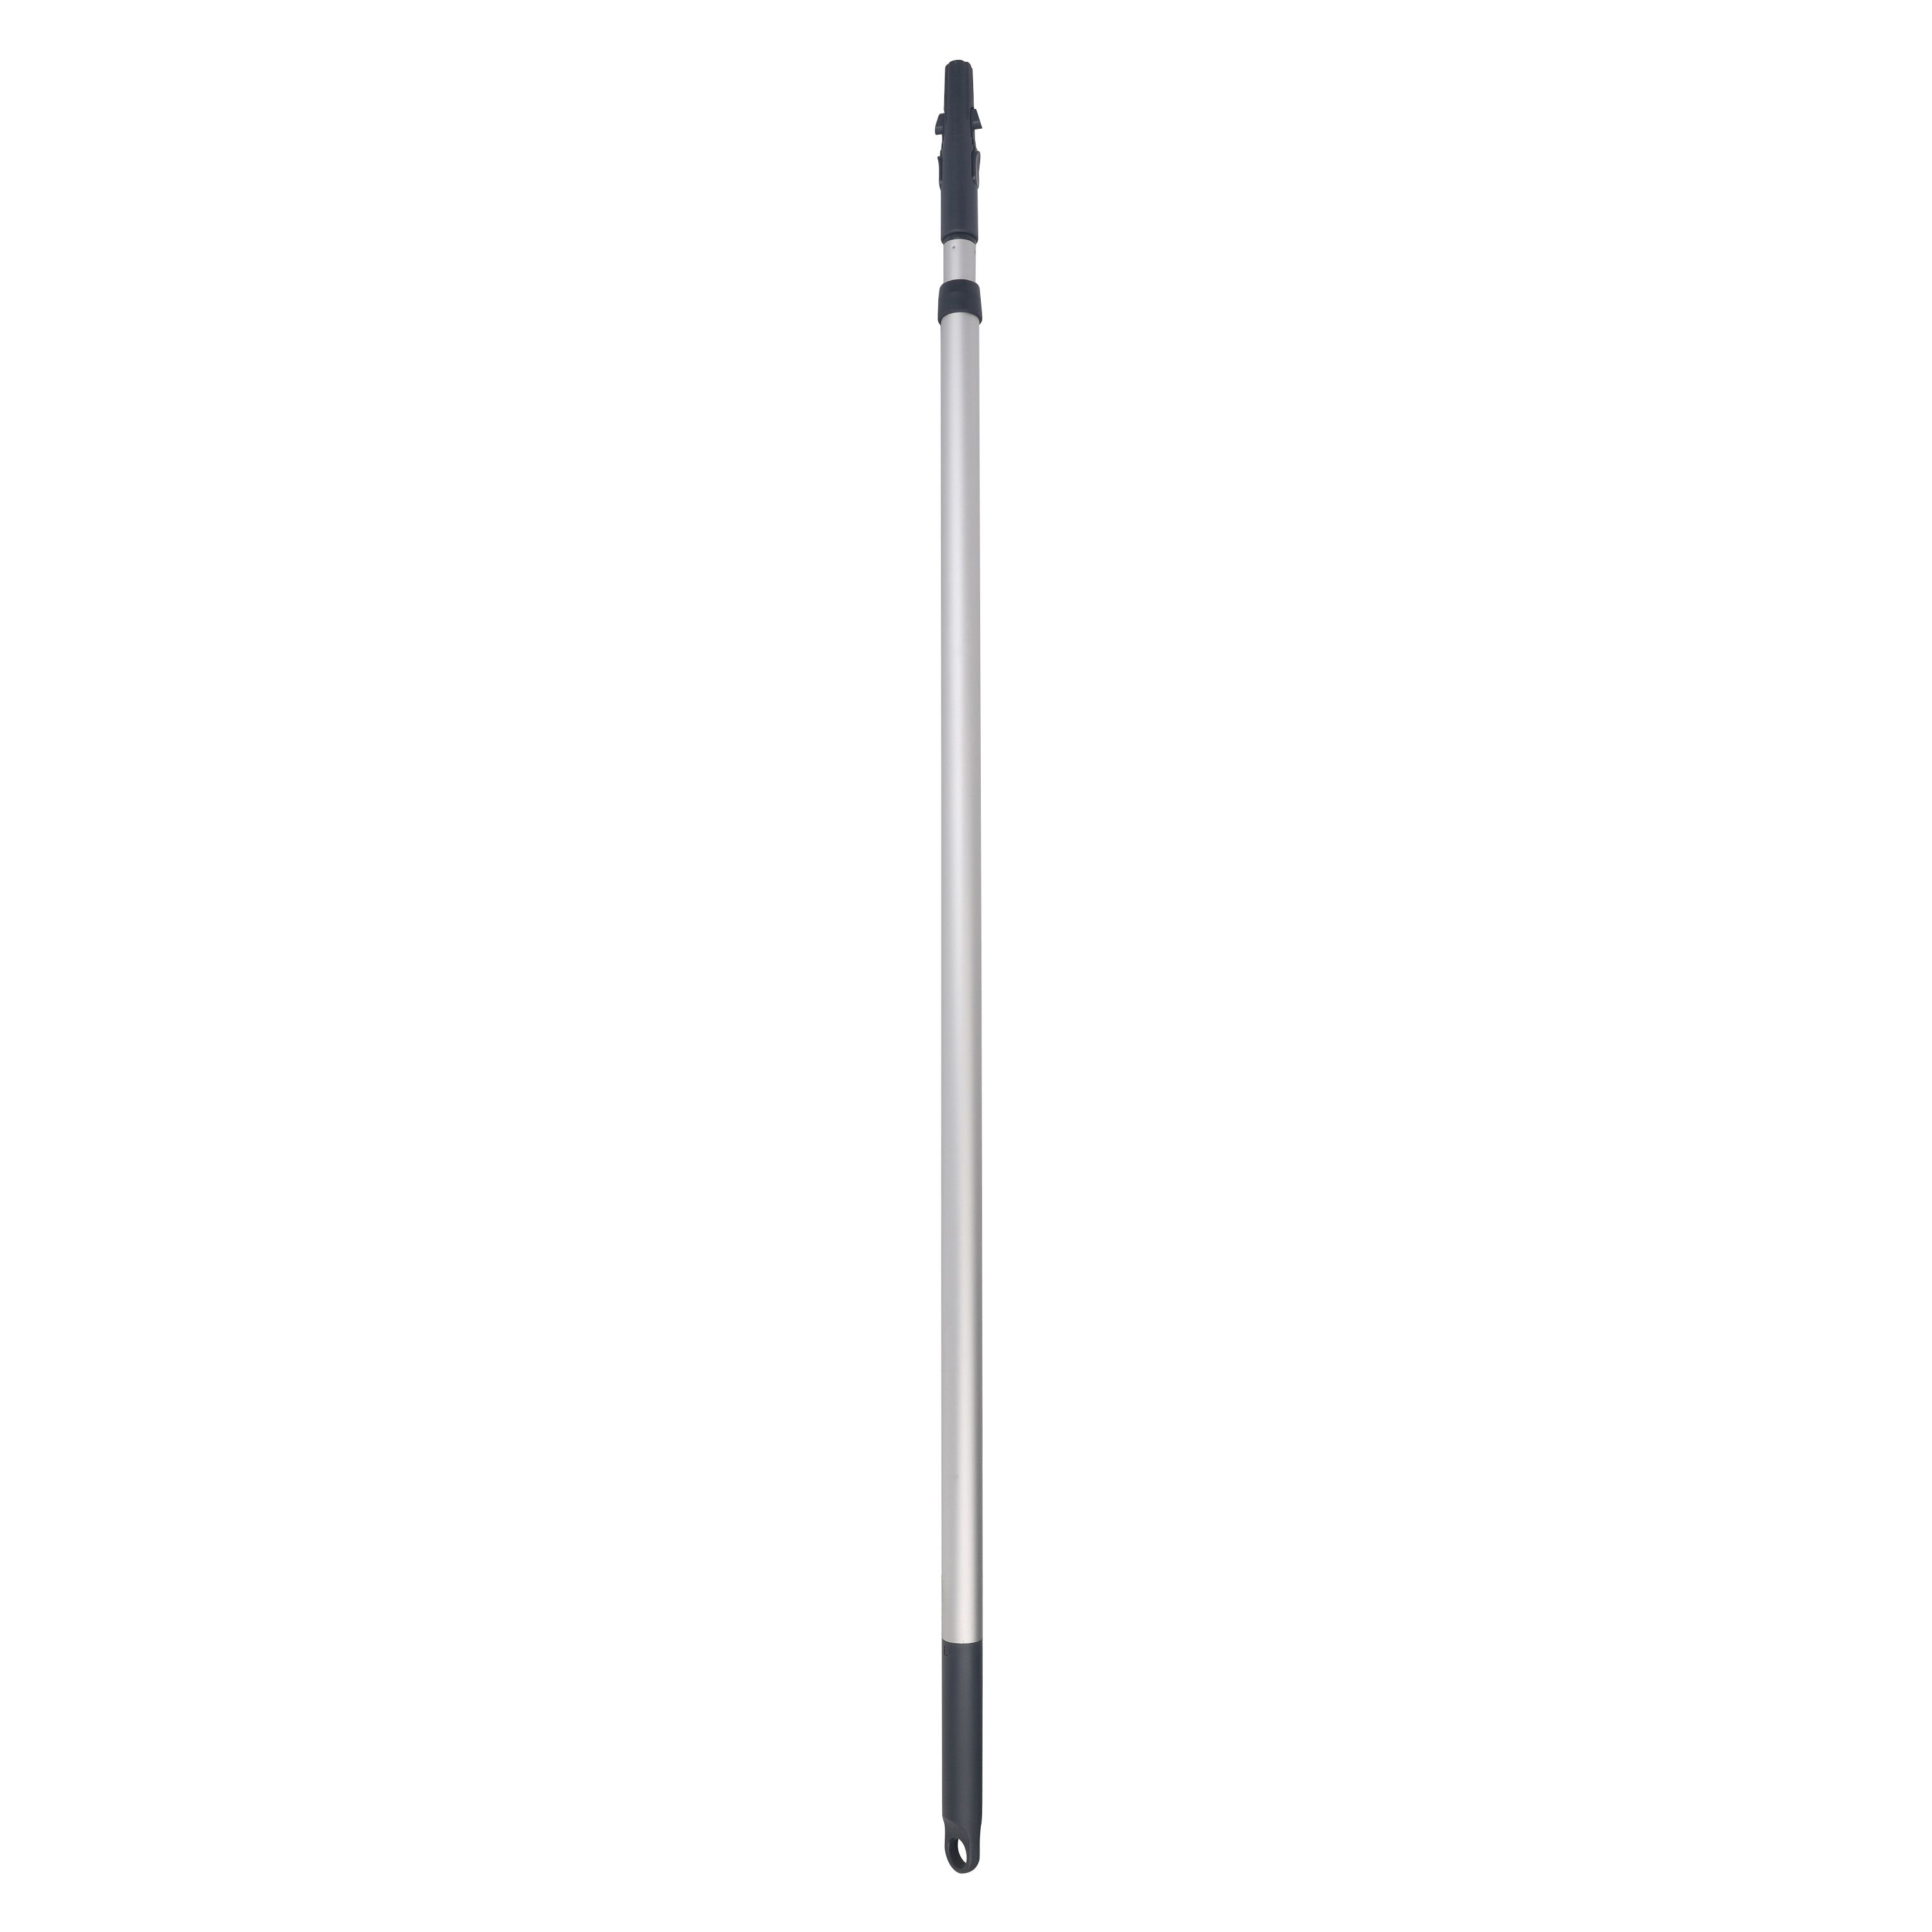 https://media.diy.com/is/image/Kingfisher/goodhome-telescopic-extension-pole-1000-2000mm~5059340016740_01c?$MOB_PREV$&$width=768&$height=768